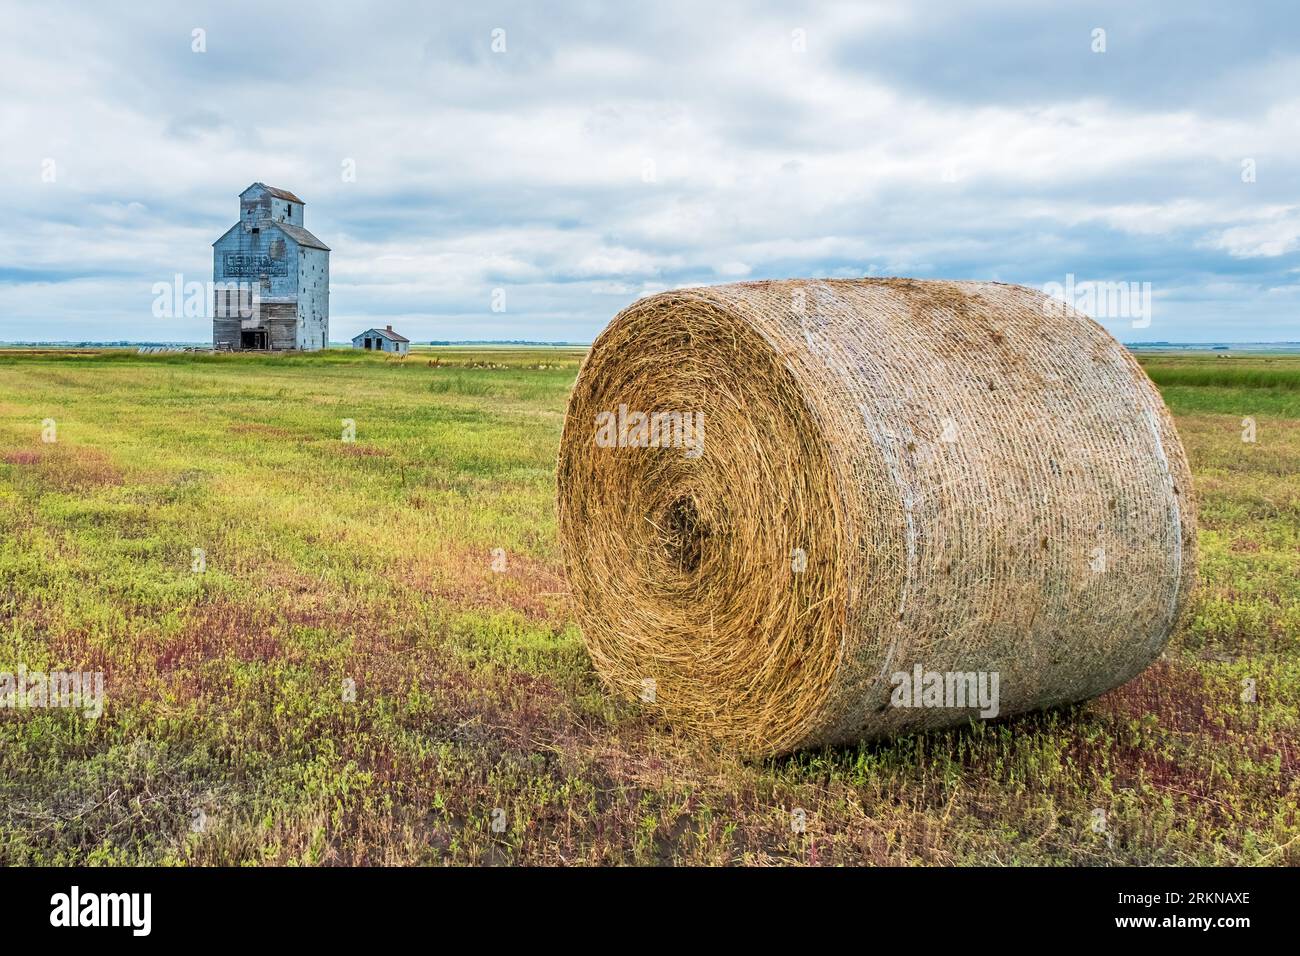 A large round bale of straw in a field with an old grain elevator in the background in rural Saskatchewan. Stock Photo